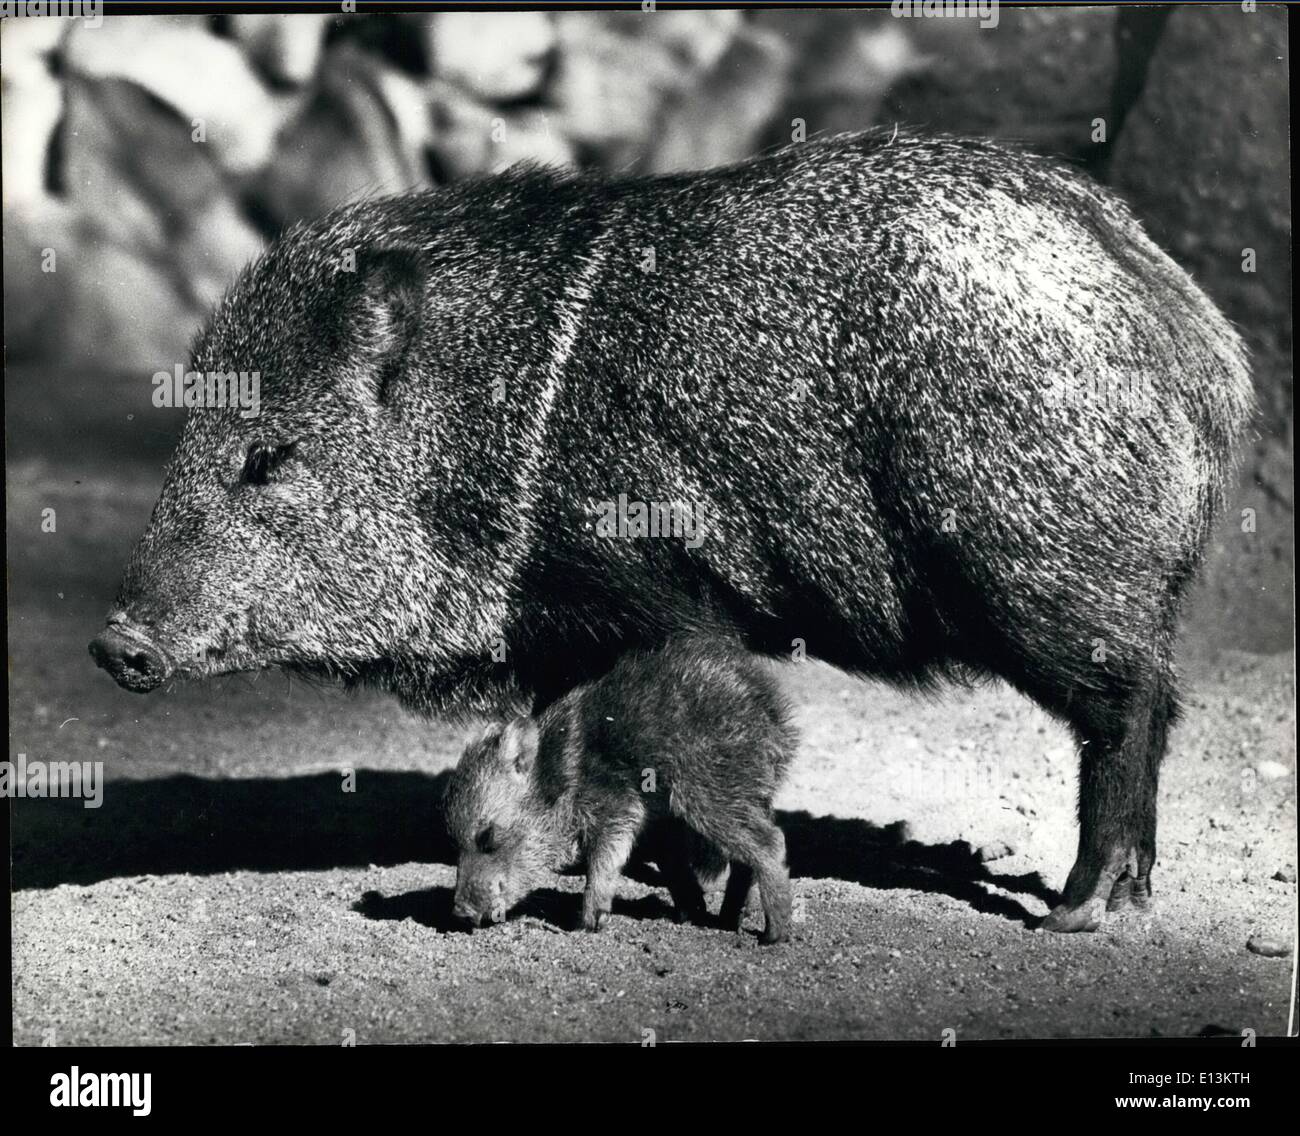 Mar. 02, 2012 - Tiny chip of the old block: Resembling an exact replica of its grown up mother, a tiny Collared peccary is seen Stock Photo